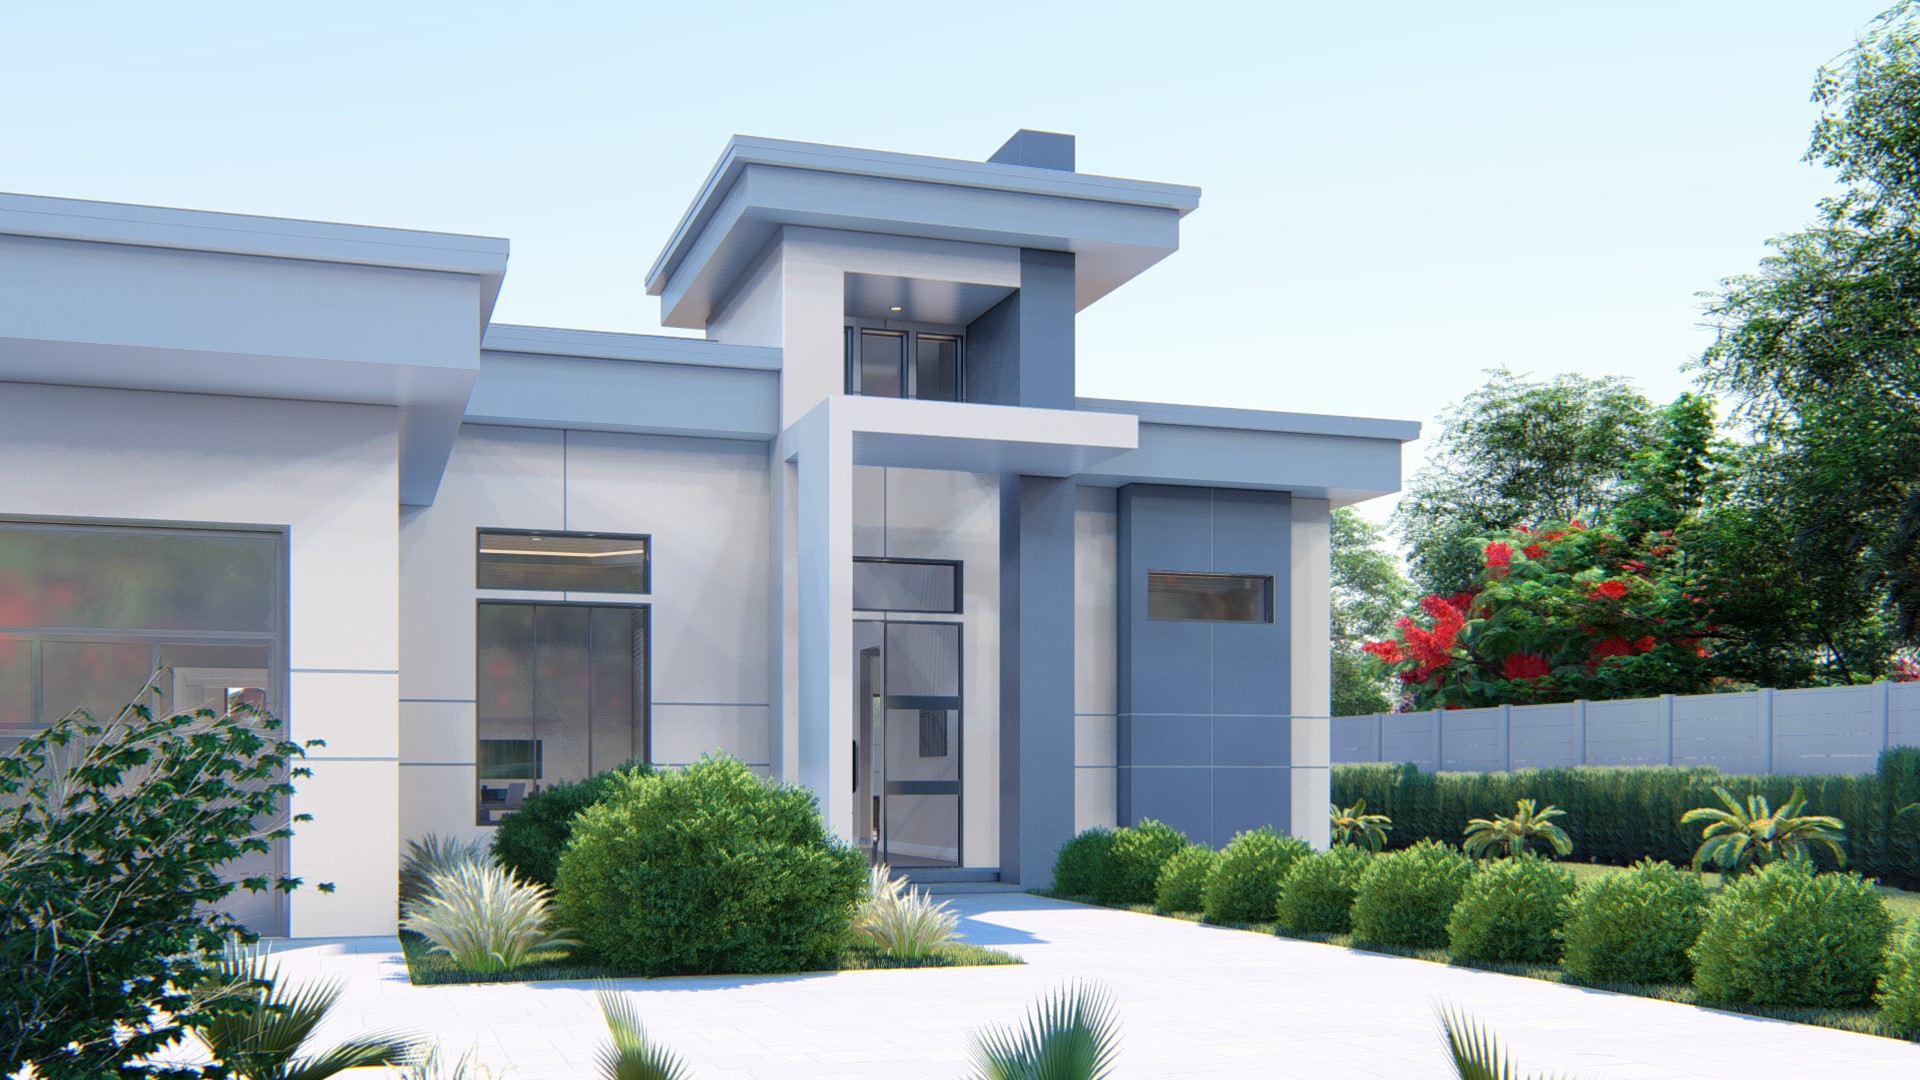 This is a render of a new home design by 1 to 9 design